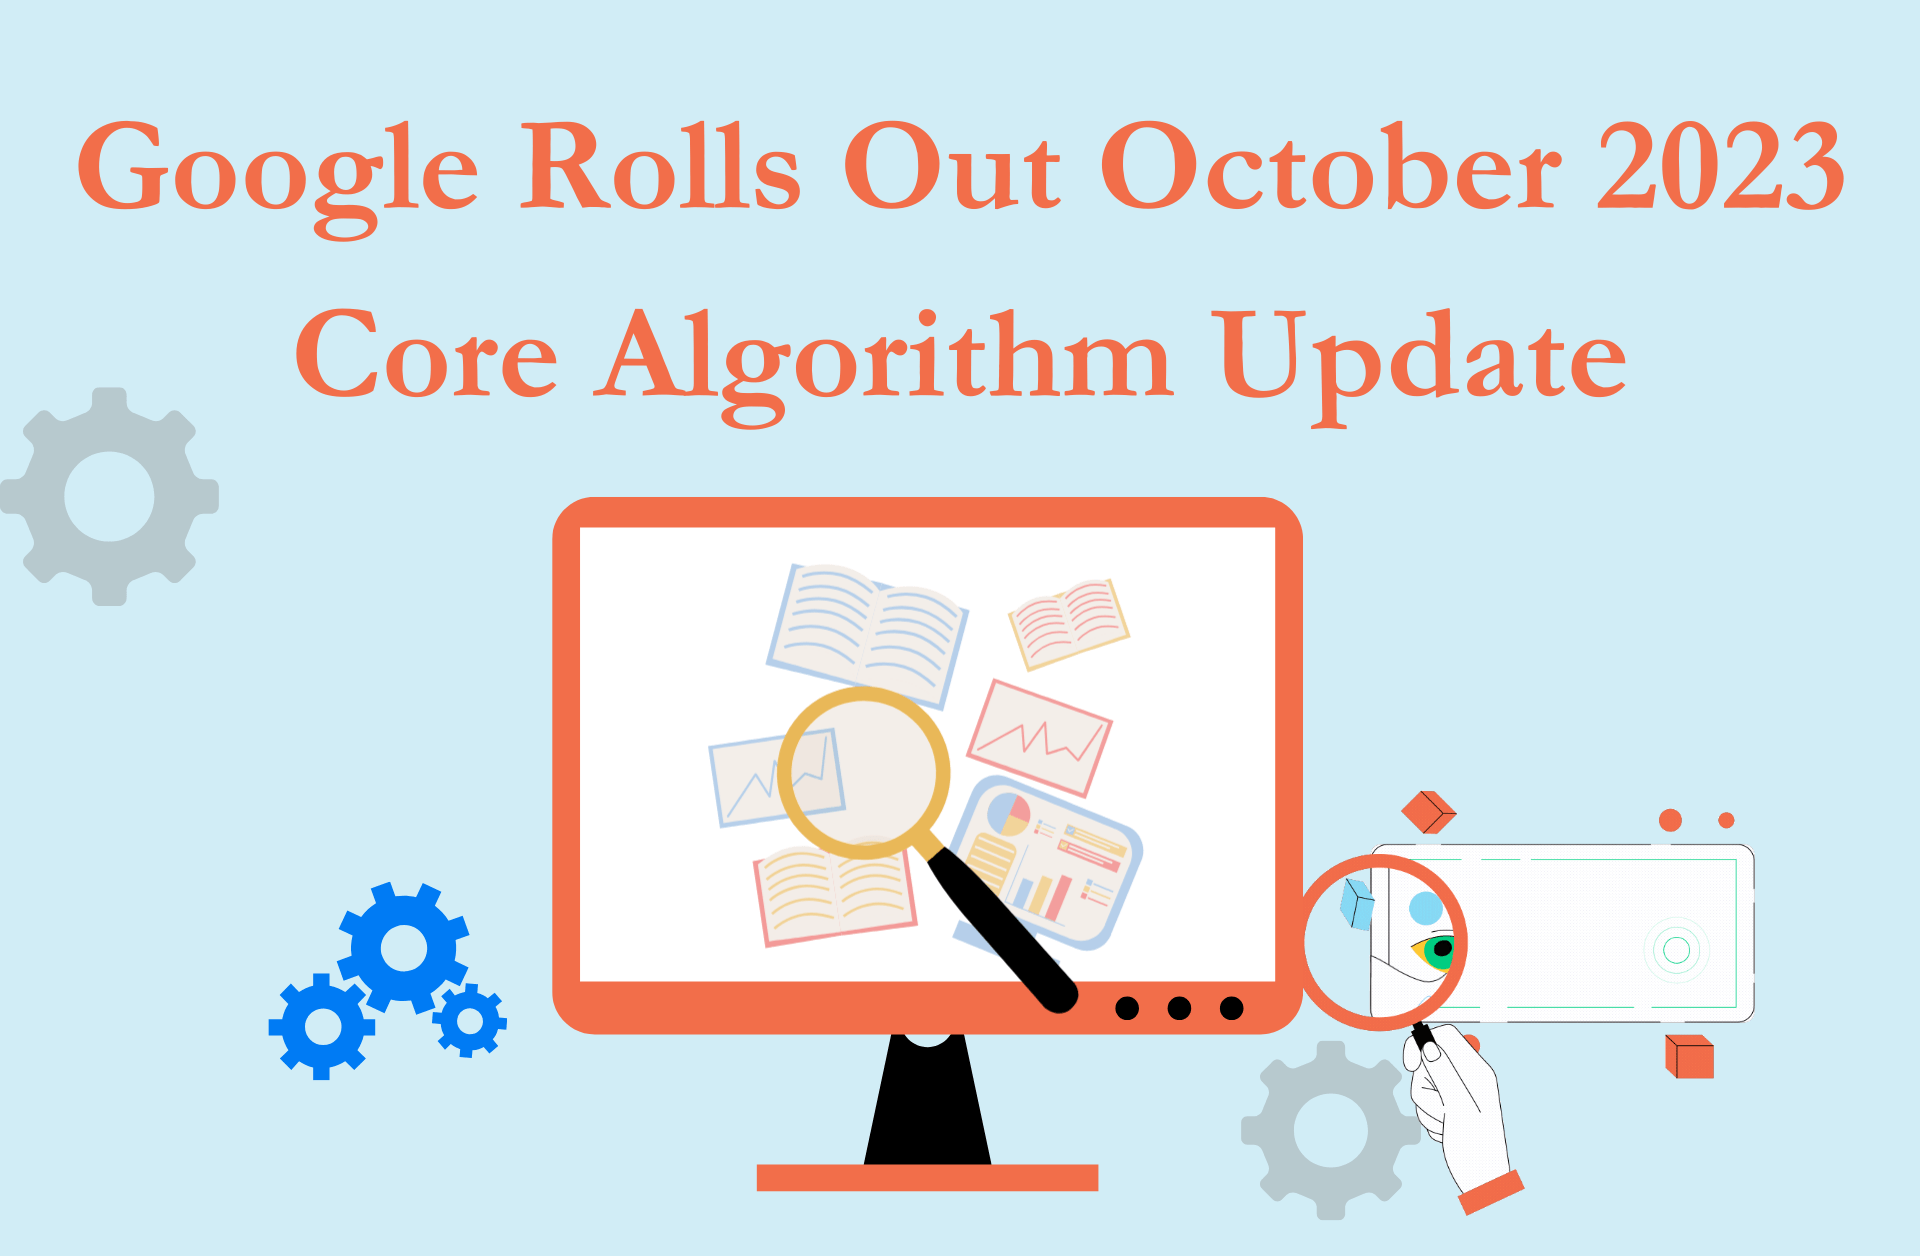 You are currently viewing Google Rolls Out October 2023 Core Algorithm Update